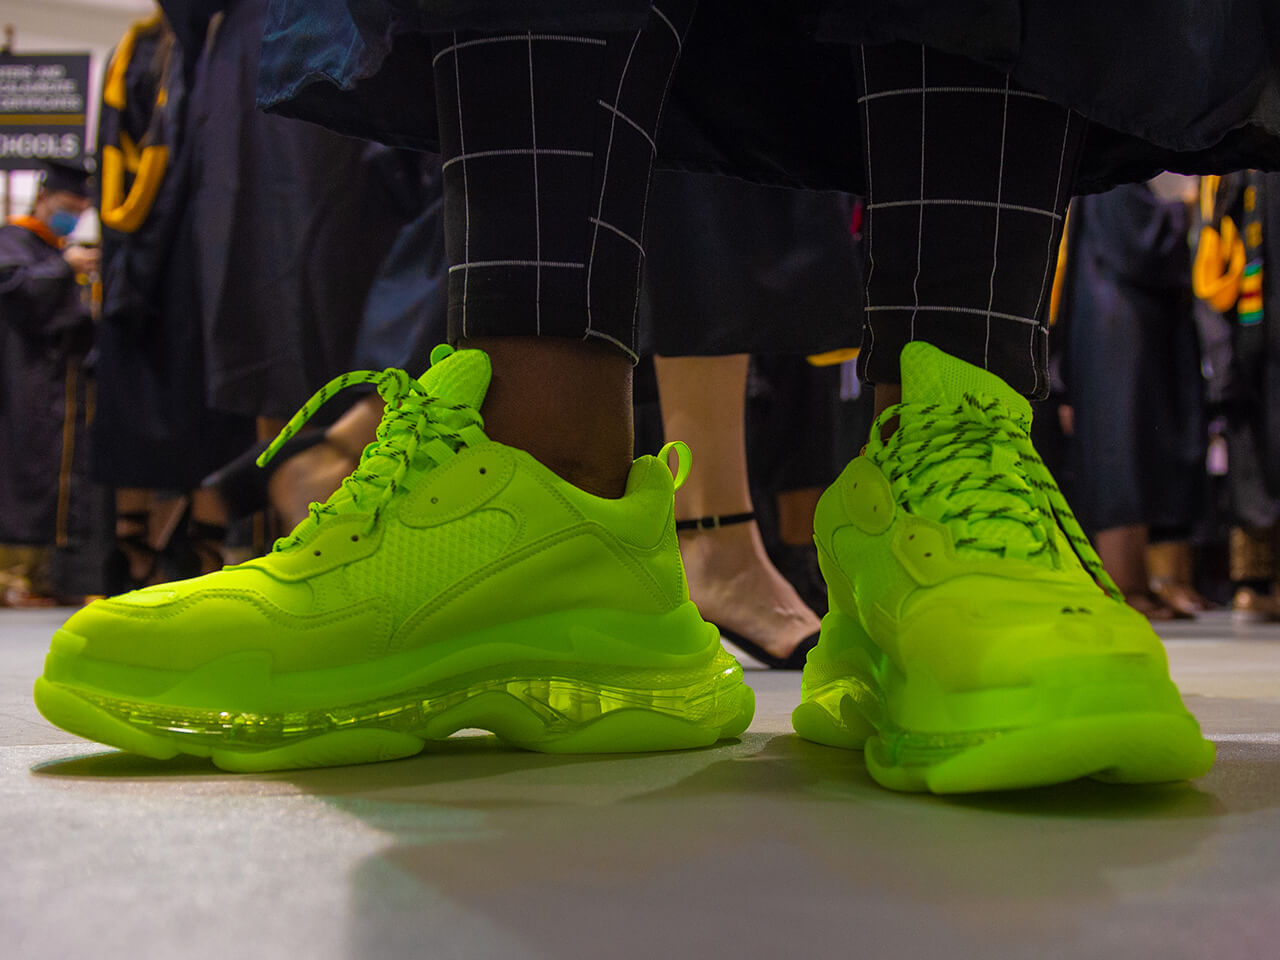 A pair of bright neon green shoes